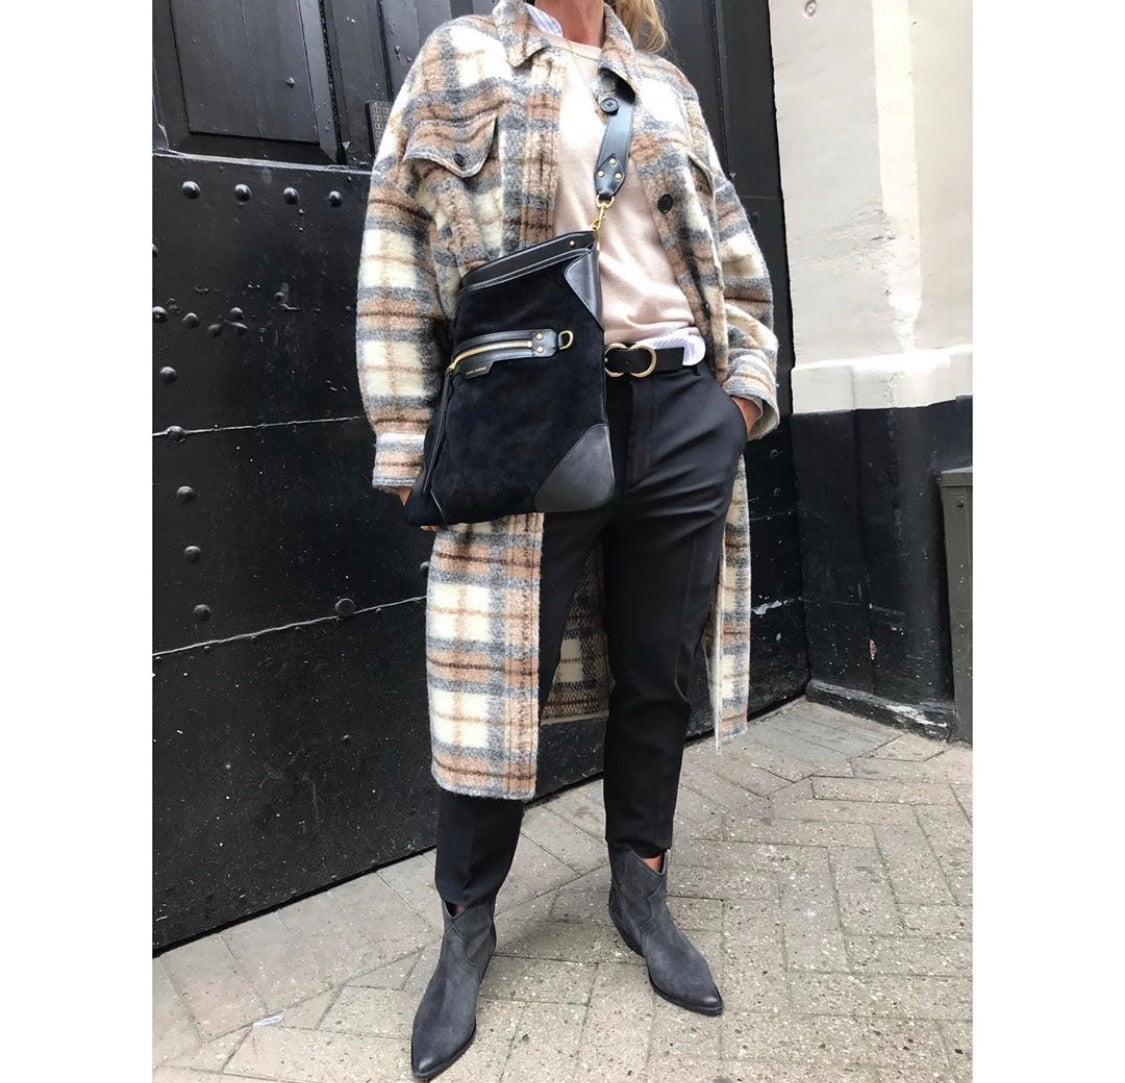 Chicdear New Autumn Winter Women Thick Vintage Plaid Long Wool Coat Casual Oversize Shirt Jacket Loose Warm Outwear Overcoats Female